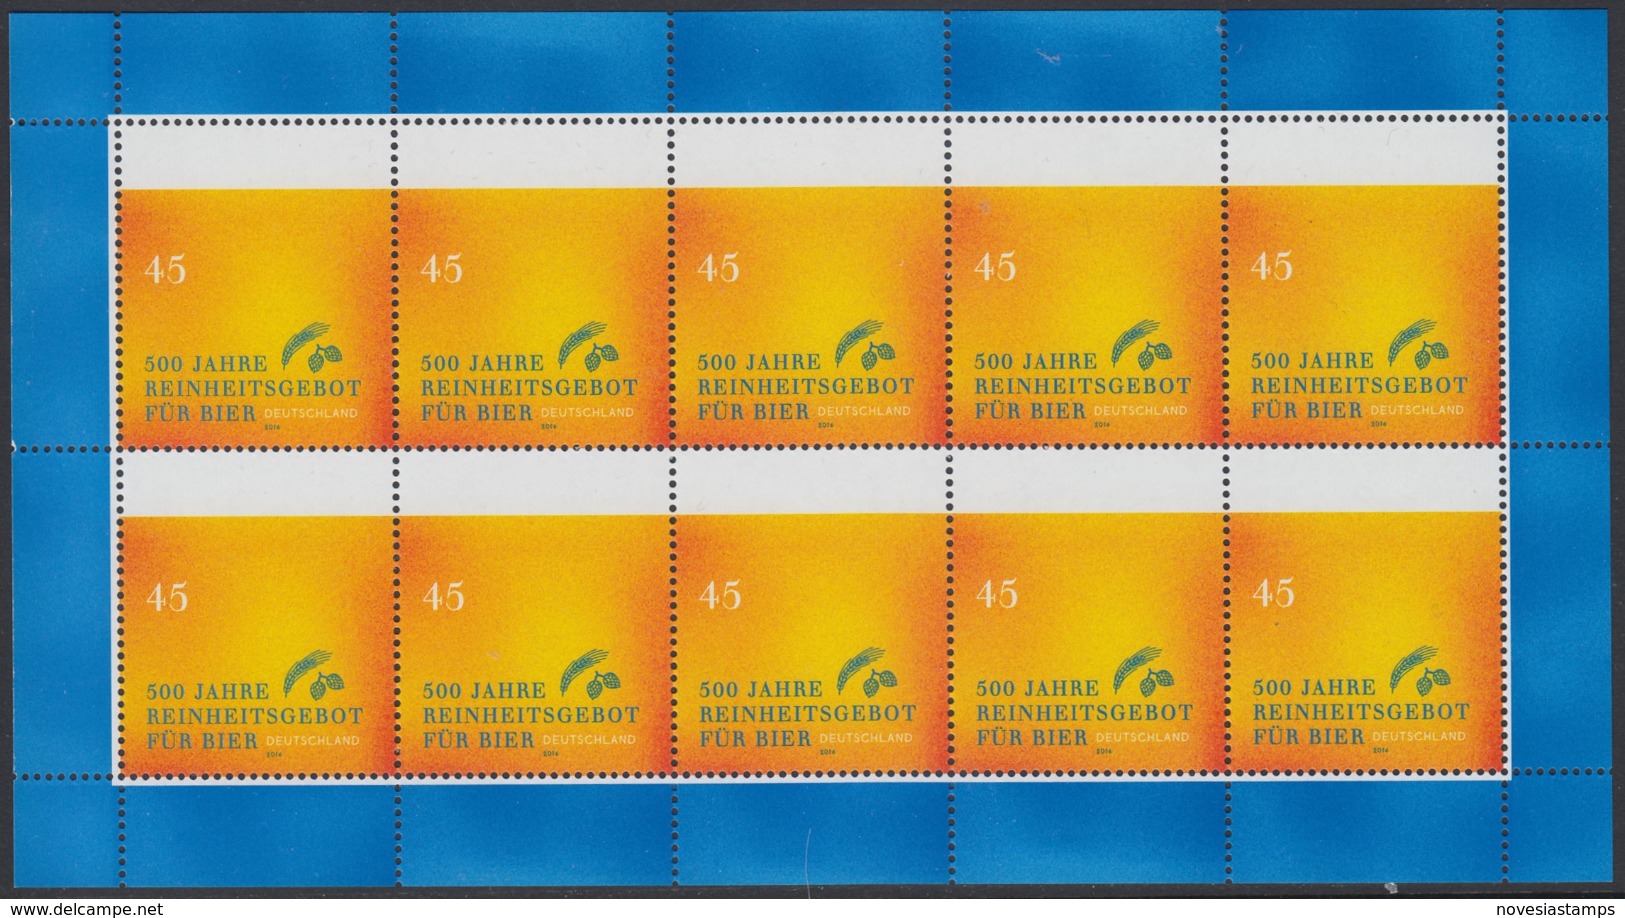 !a! GERMANY 2016 Mi. 3229 MNH SHEET(10) - German Purity Law For Beere - 2011-2020